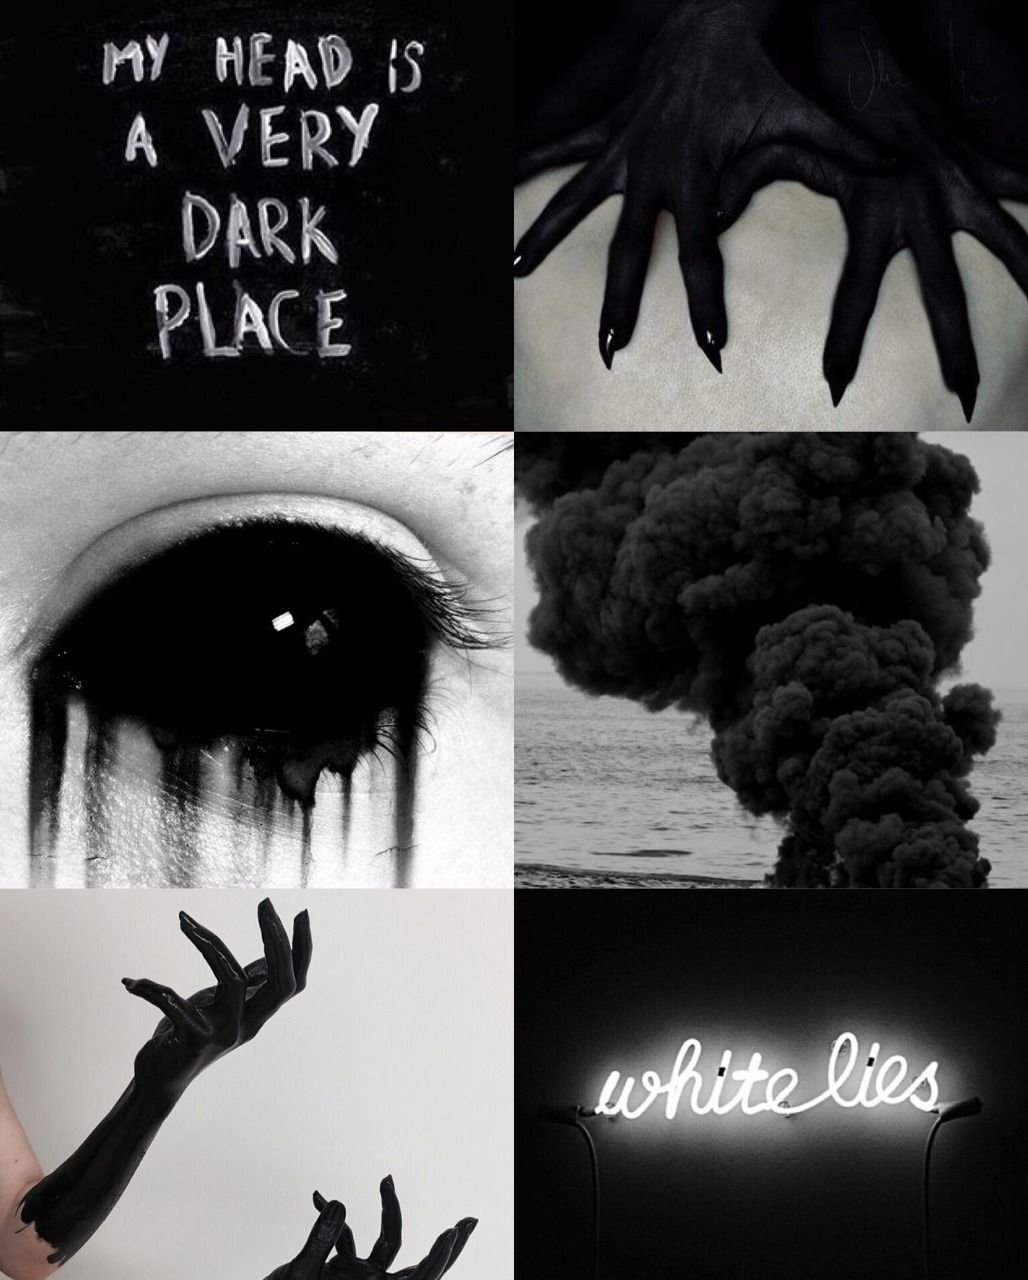 Demon Aesthetic ” “ The more you see.com